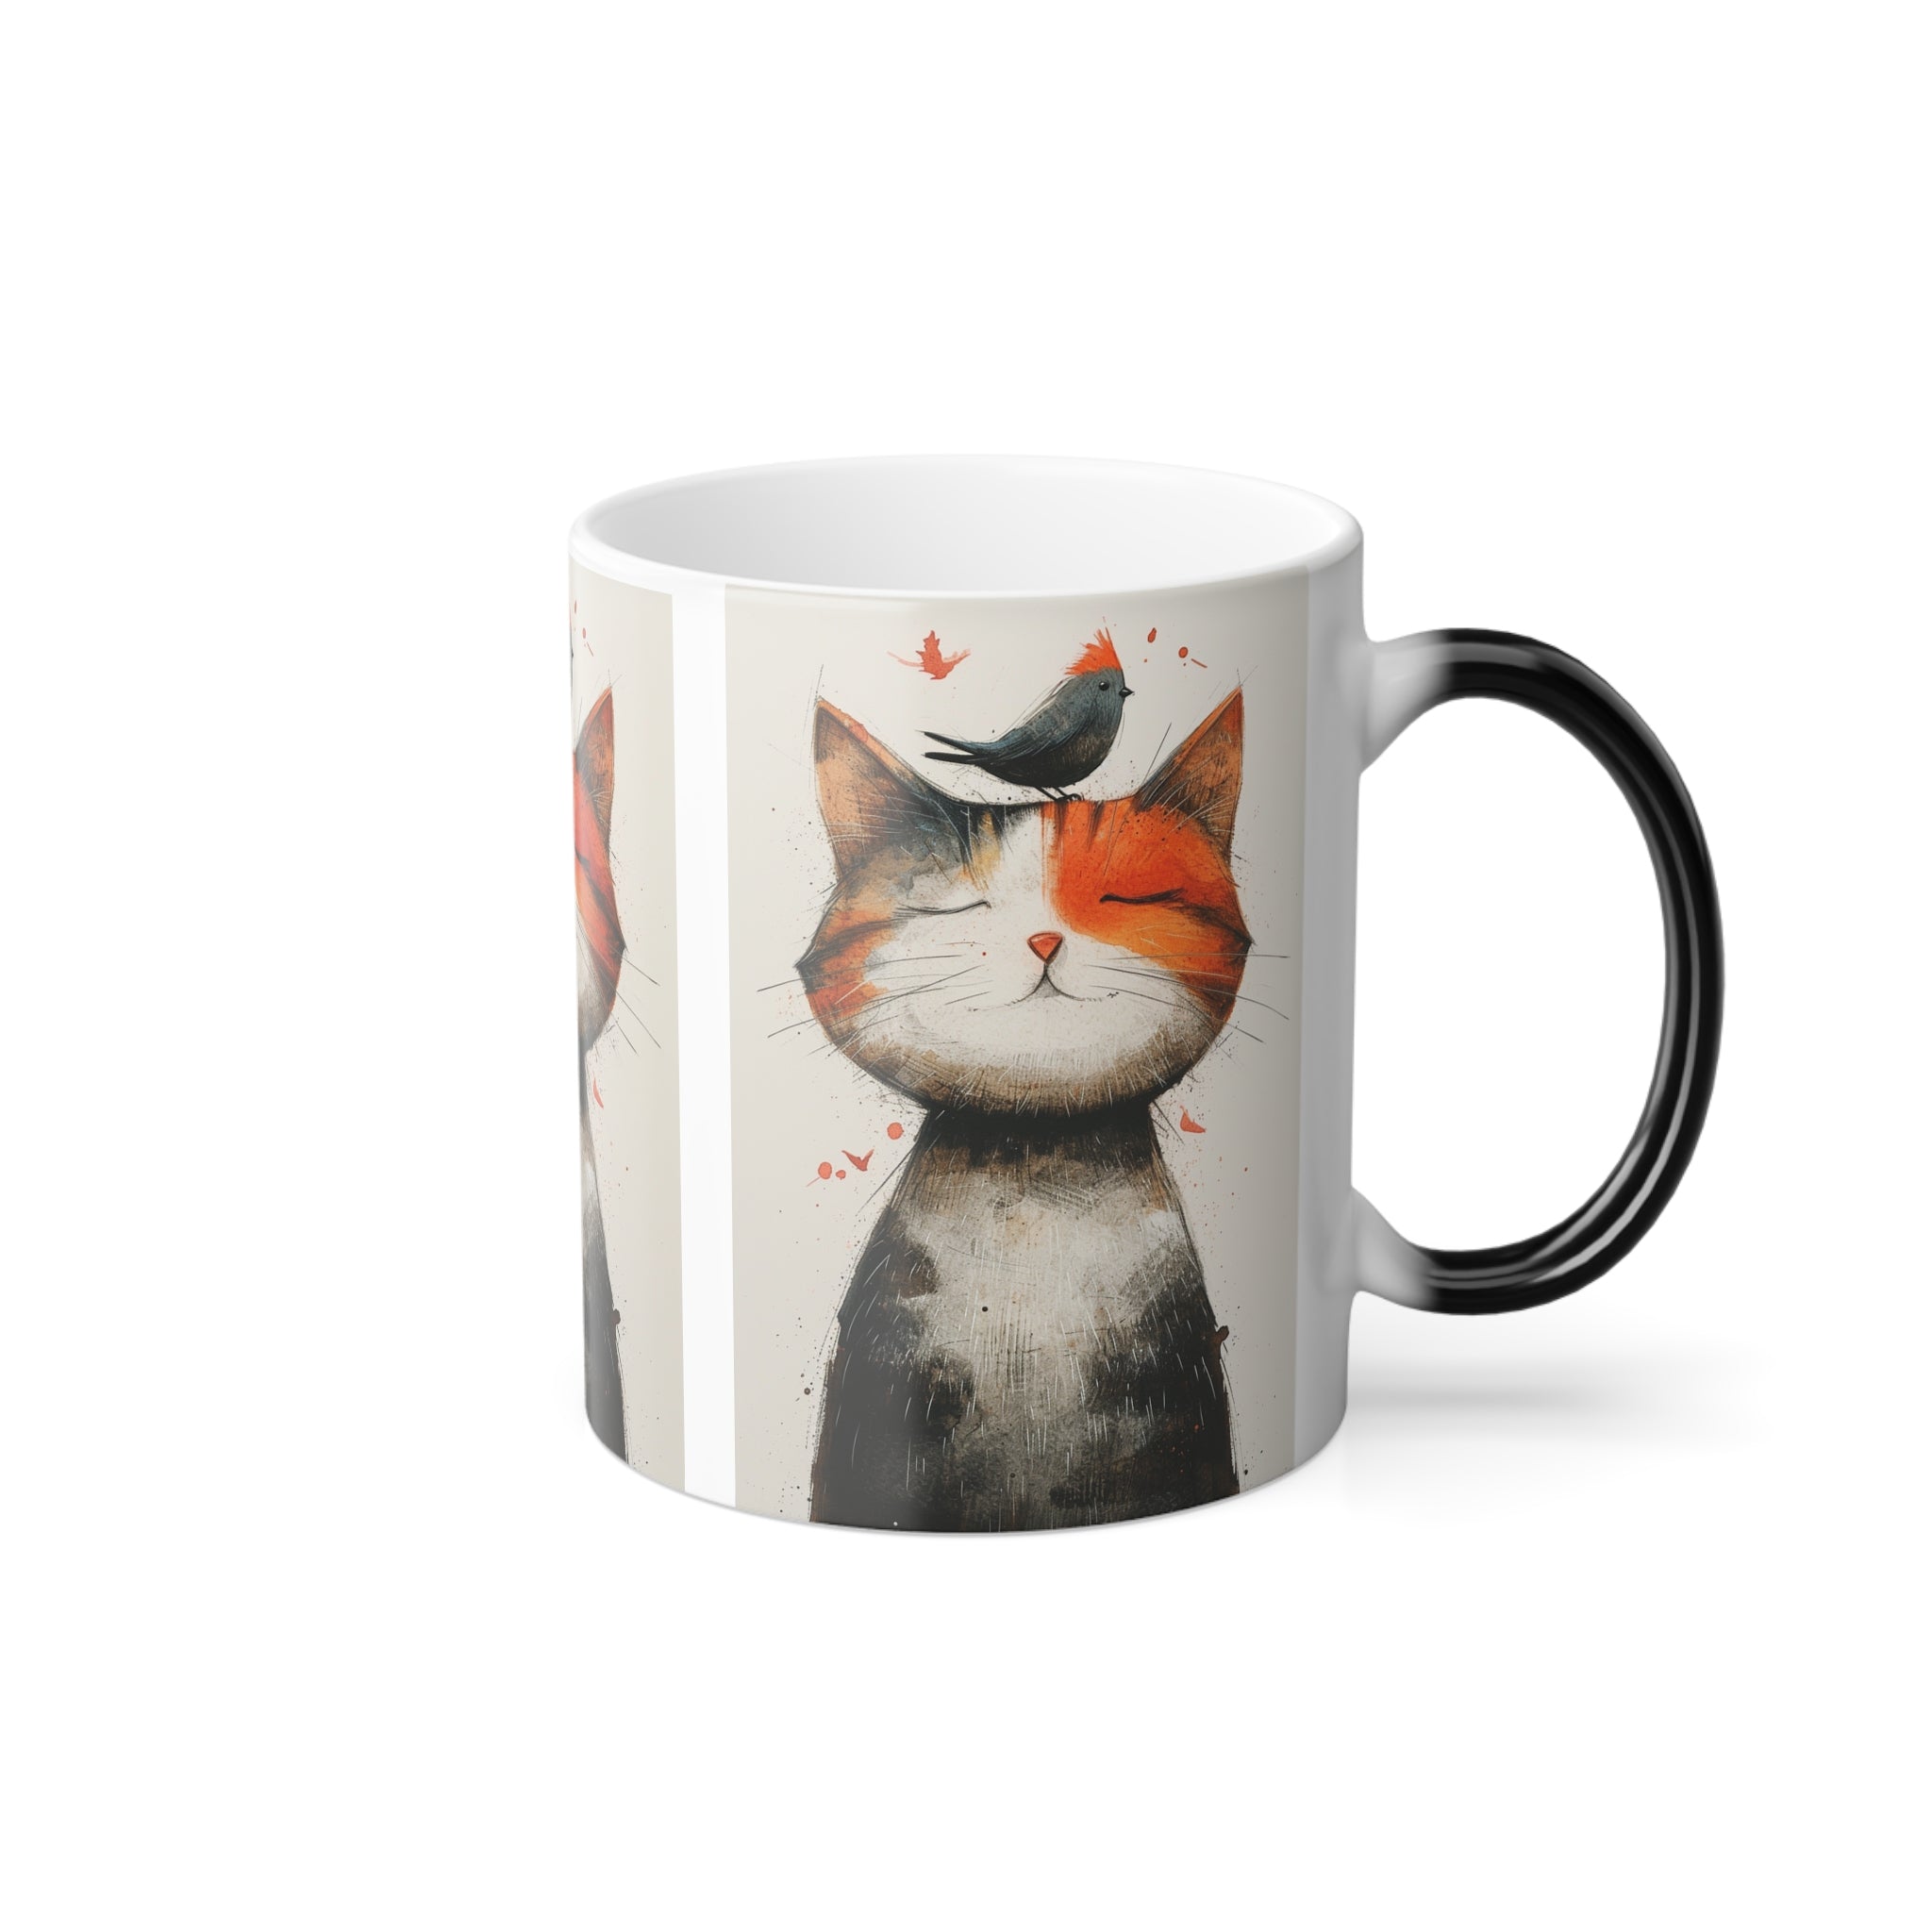 🐱🐦 Cat and Trusting Red Sparrow Friend Color Morphing Mug - 11oz | Magic Heat-Changing Ceramic Cup for Cat Lovers | Unique Color-Shift Coffee Mug